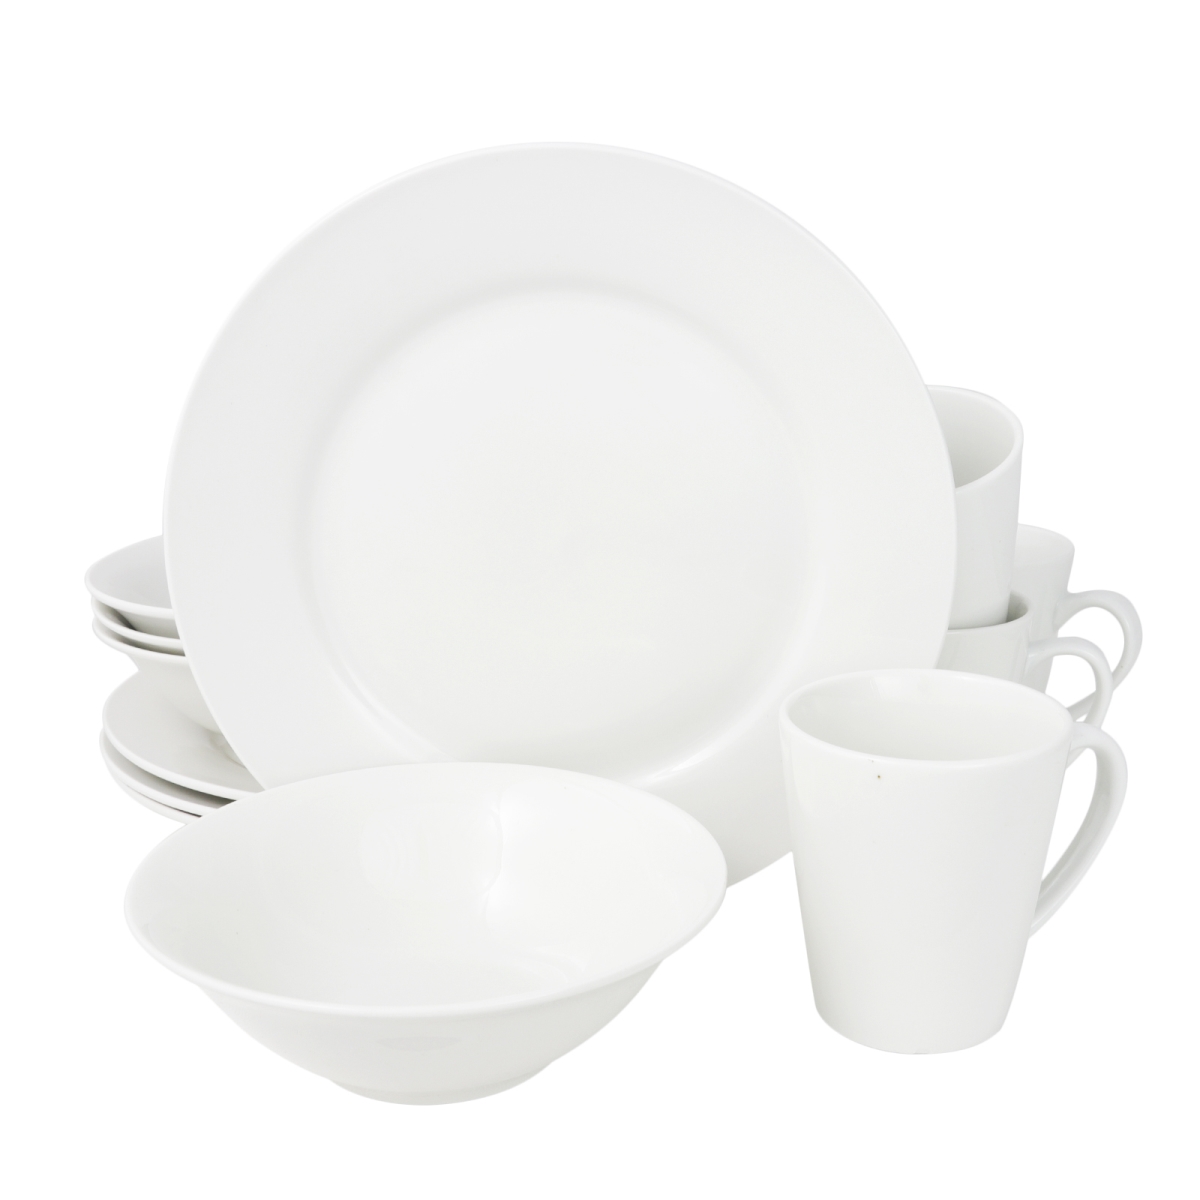 118322.12r Noble Court Dinnerware Plate Set In White - 12 Piece